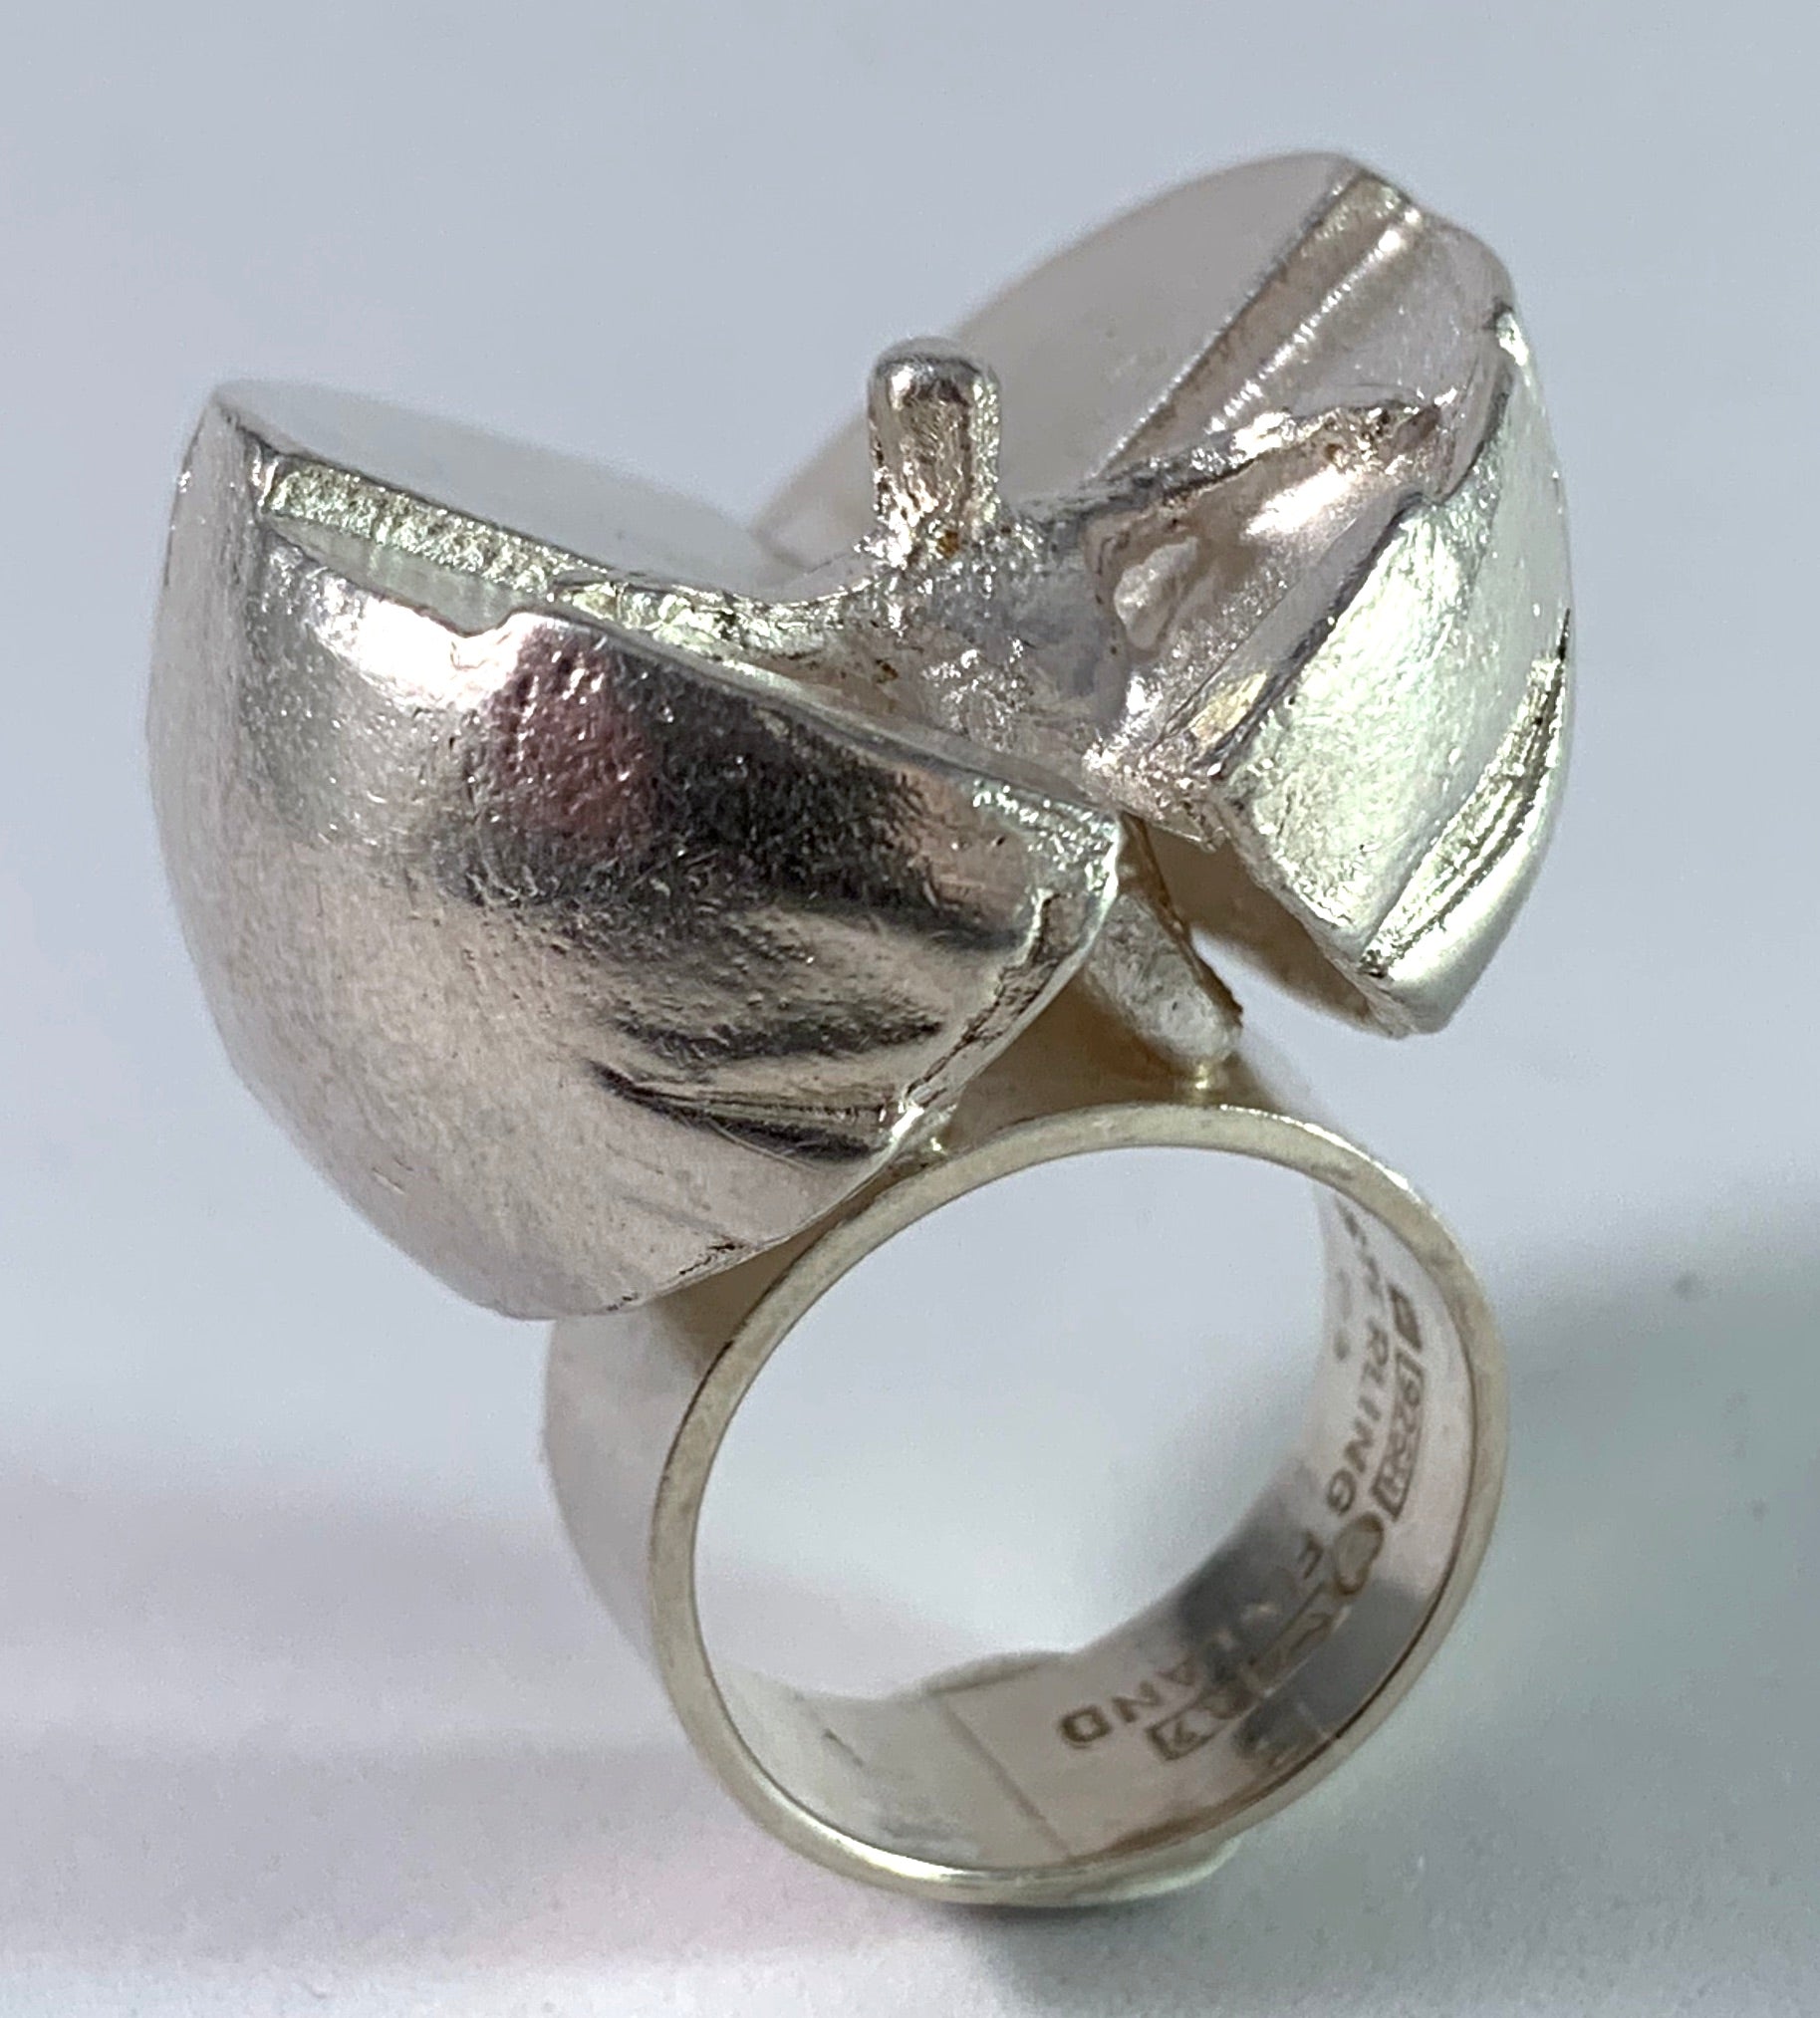 Bjorn Weckstrom for Lapponia 1967 Sterling Silver Ring. Design Ikaros from Space Series.